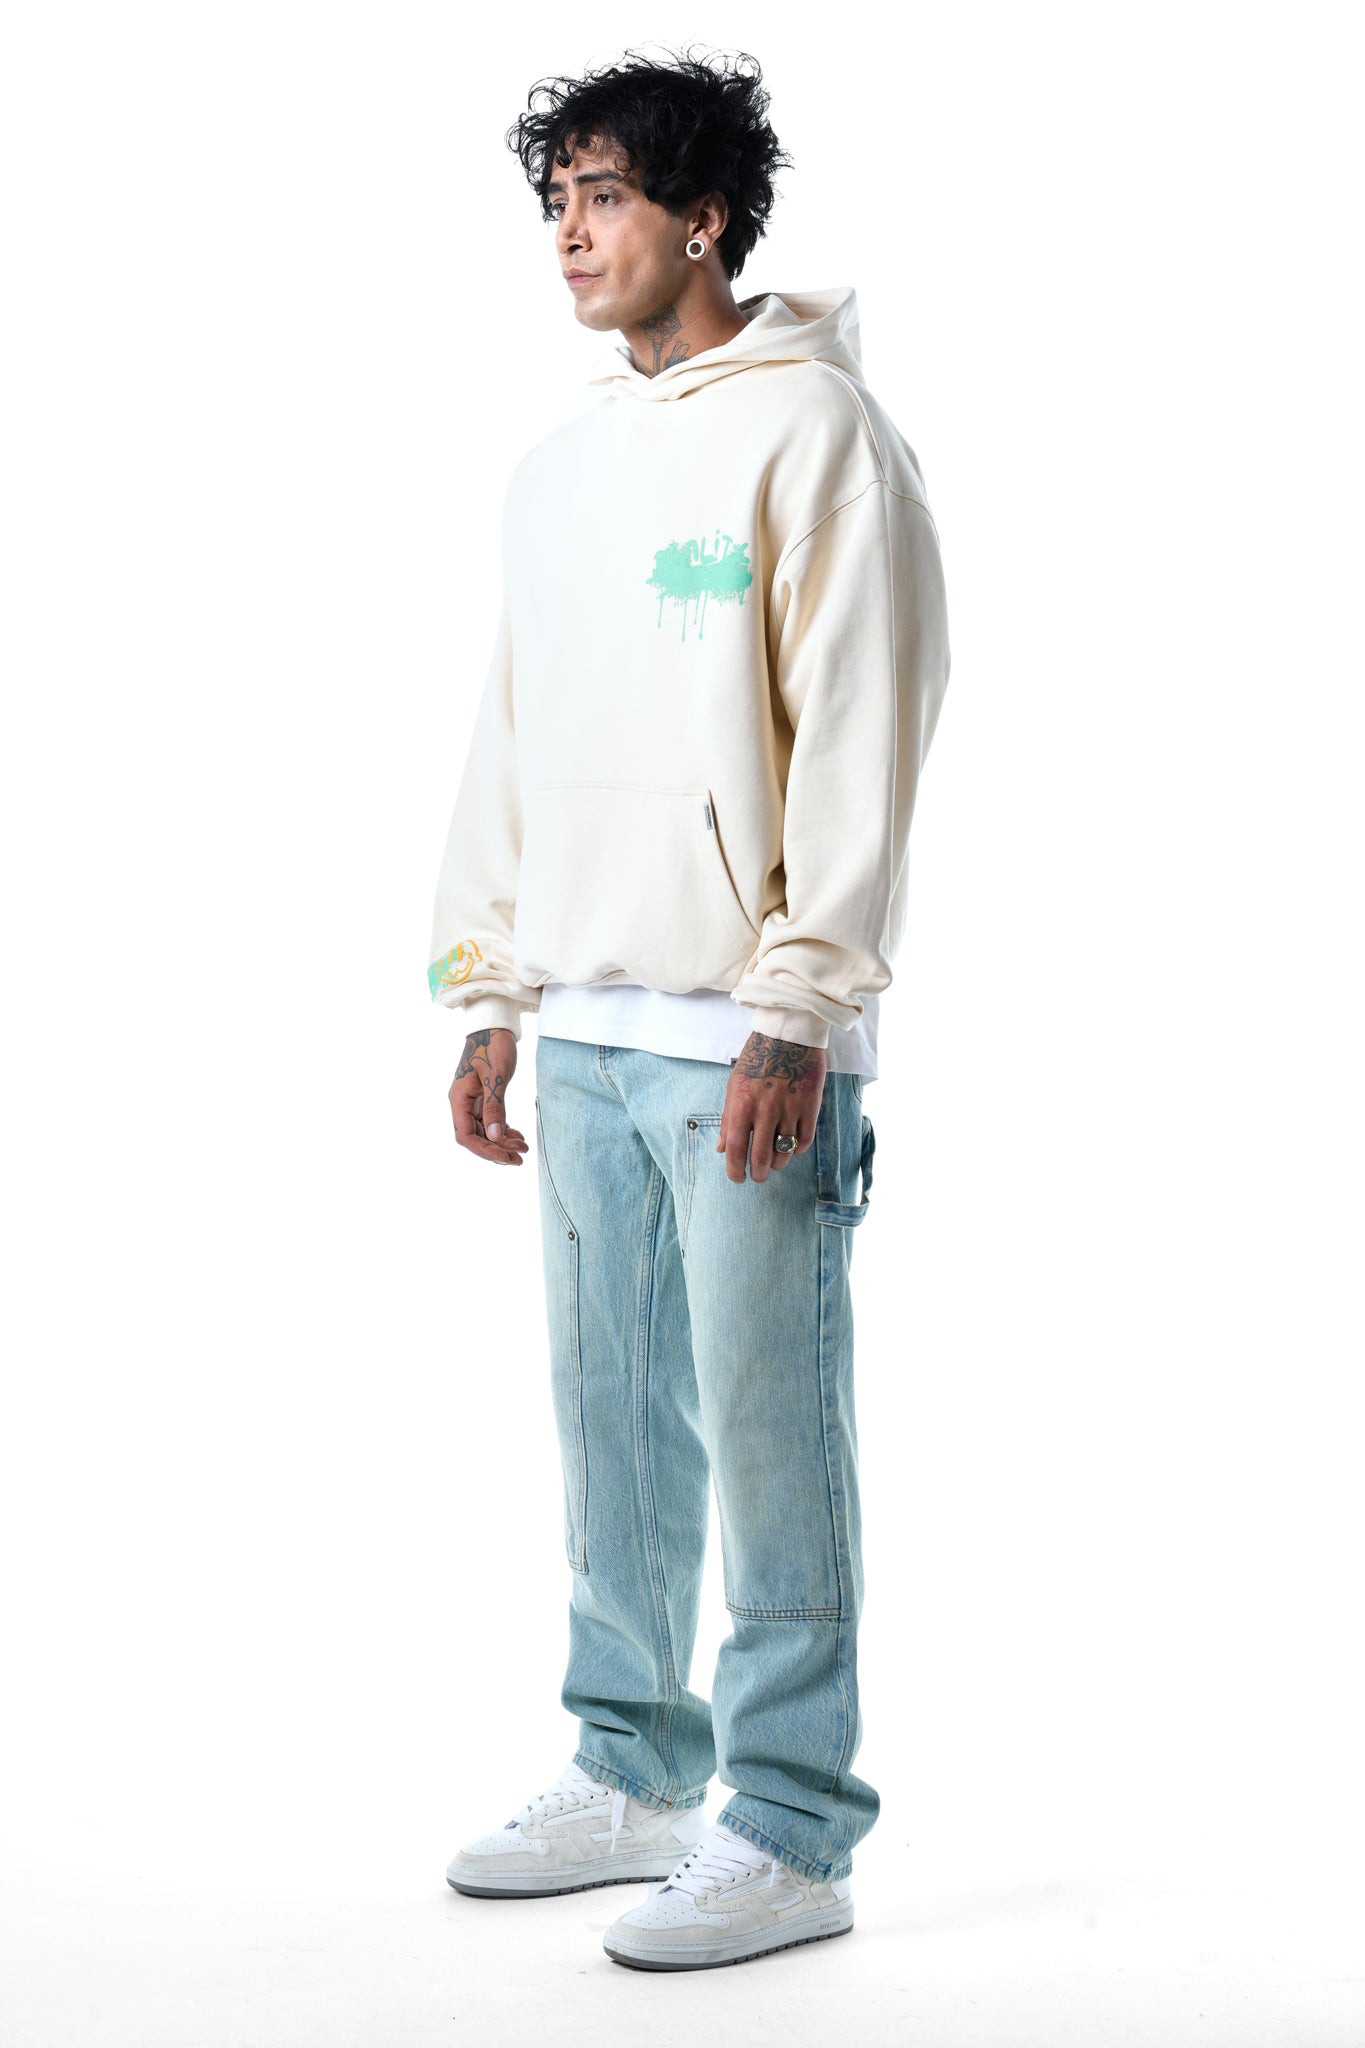 Lost Reality Vintage Washed Oversized Hoodie - Cream - UNEFFECTED STUDIOS® - Coats & Jackets - UNEFFECTED STUDIOS®